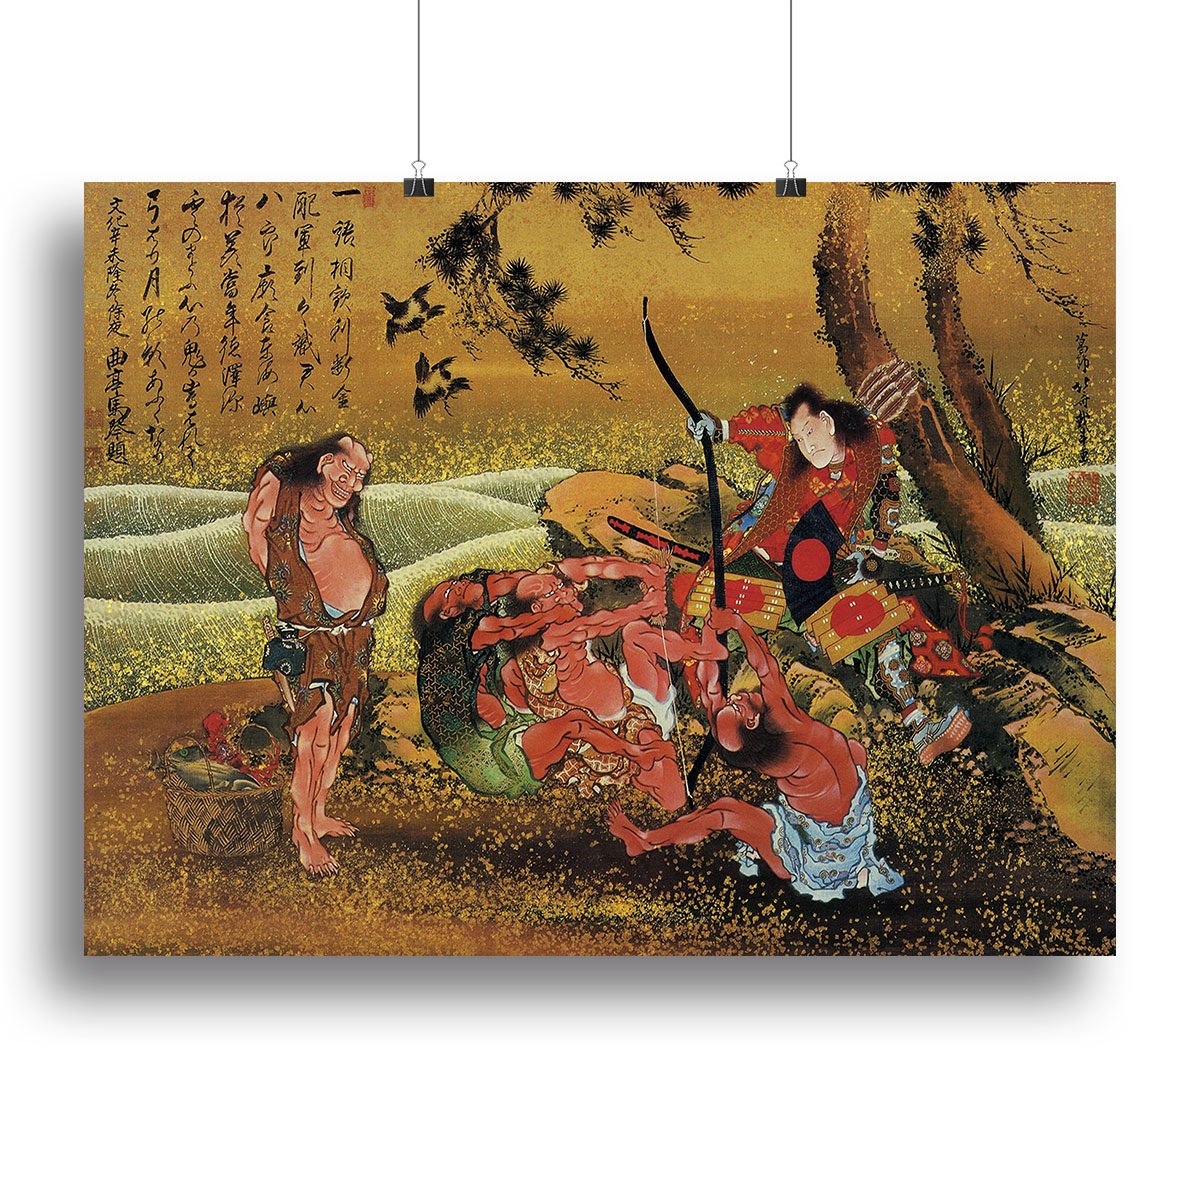 Tametomo and the demons by Hokusai Canvas Print or Poster